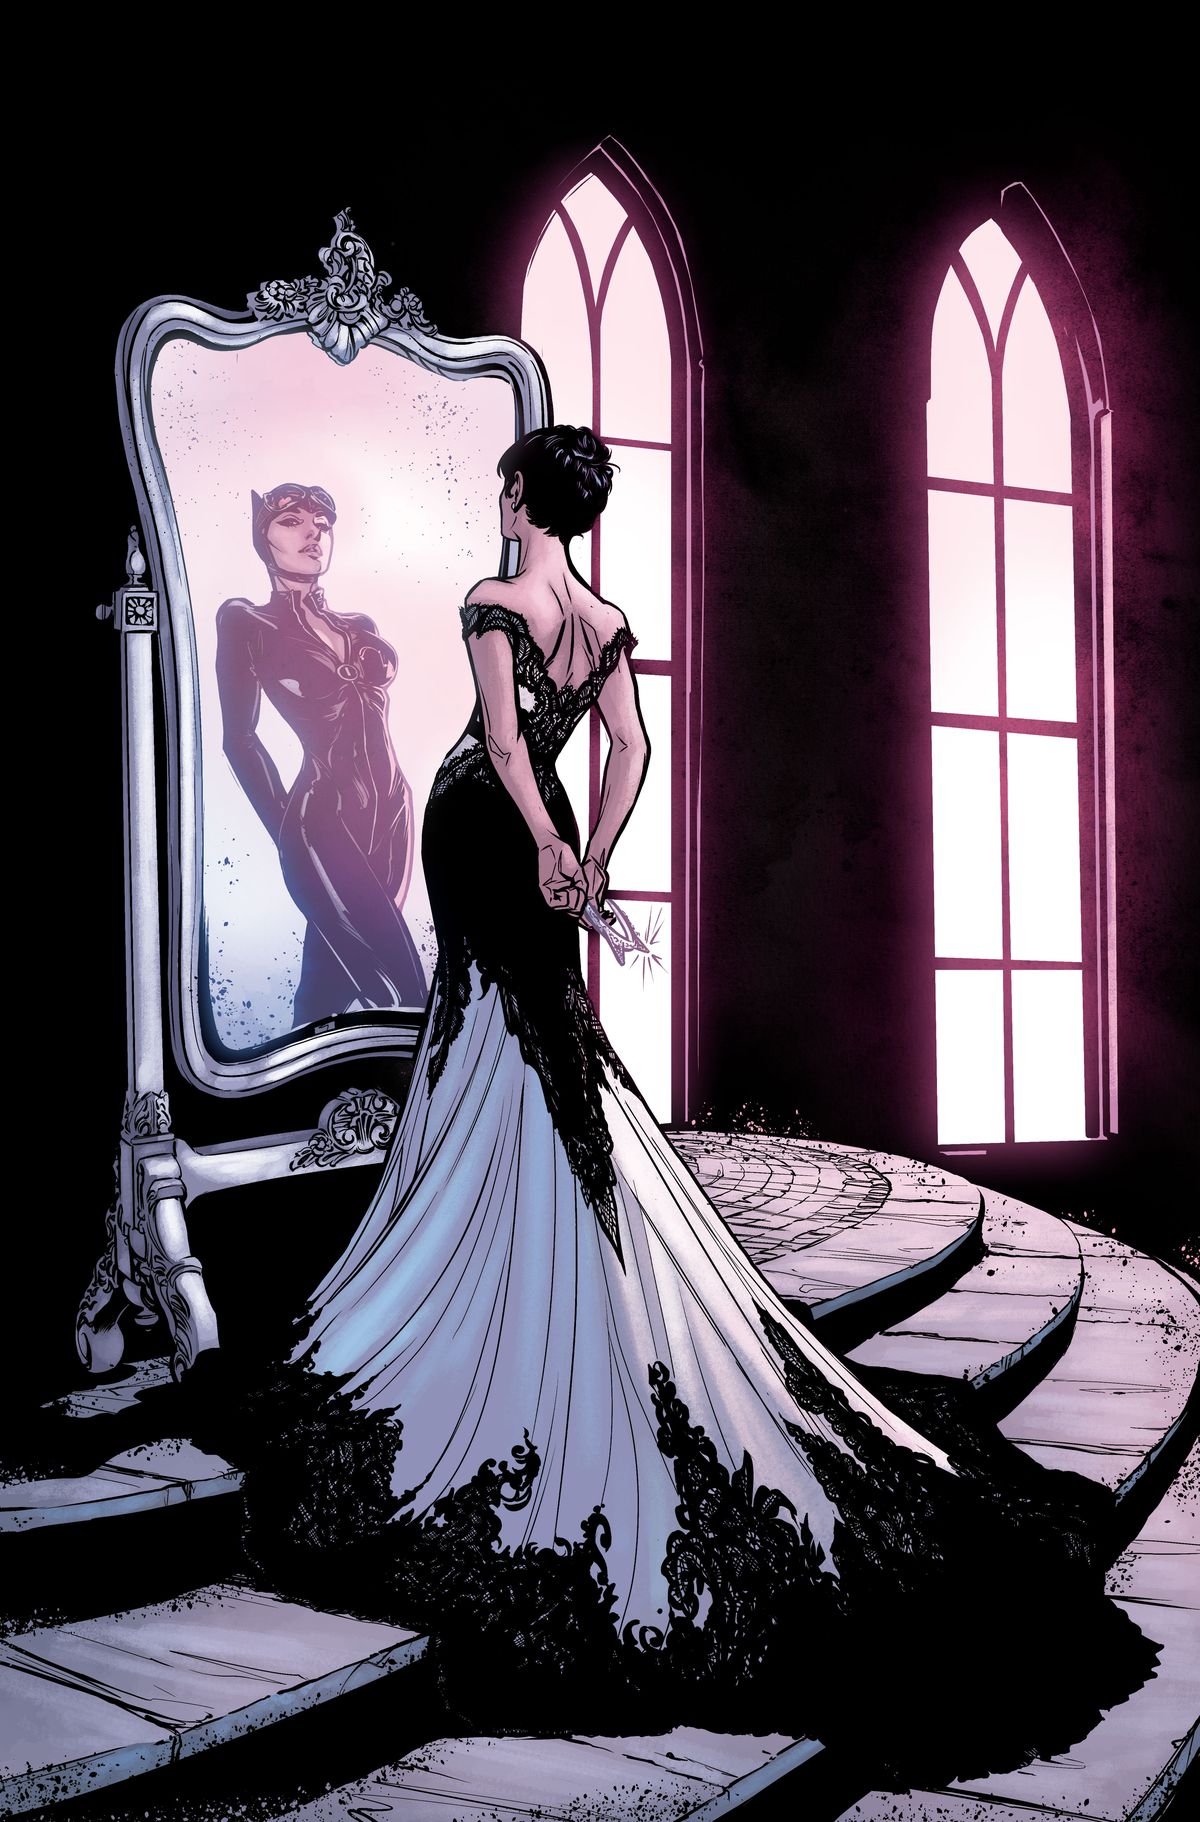 Stem hop Messy Get a first look at Catwoman's wedding dress - Polygon